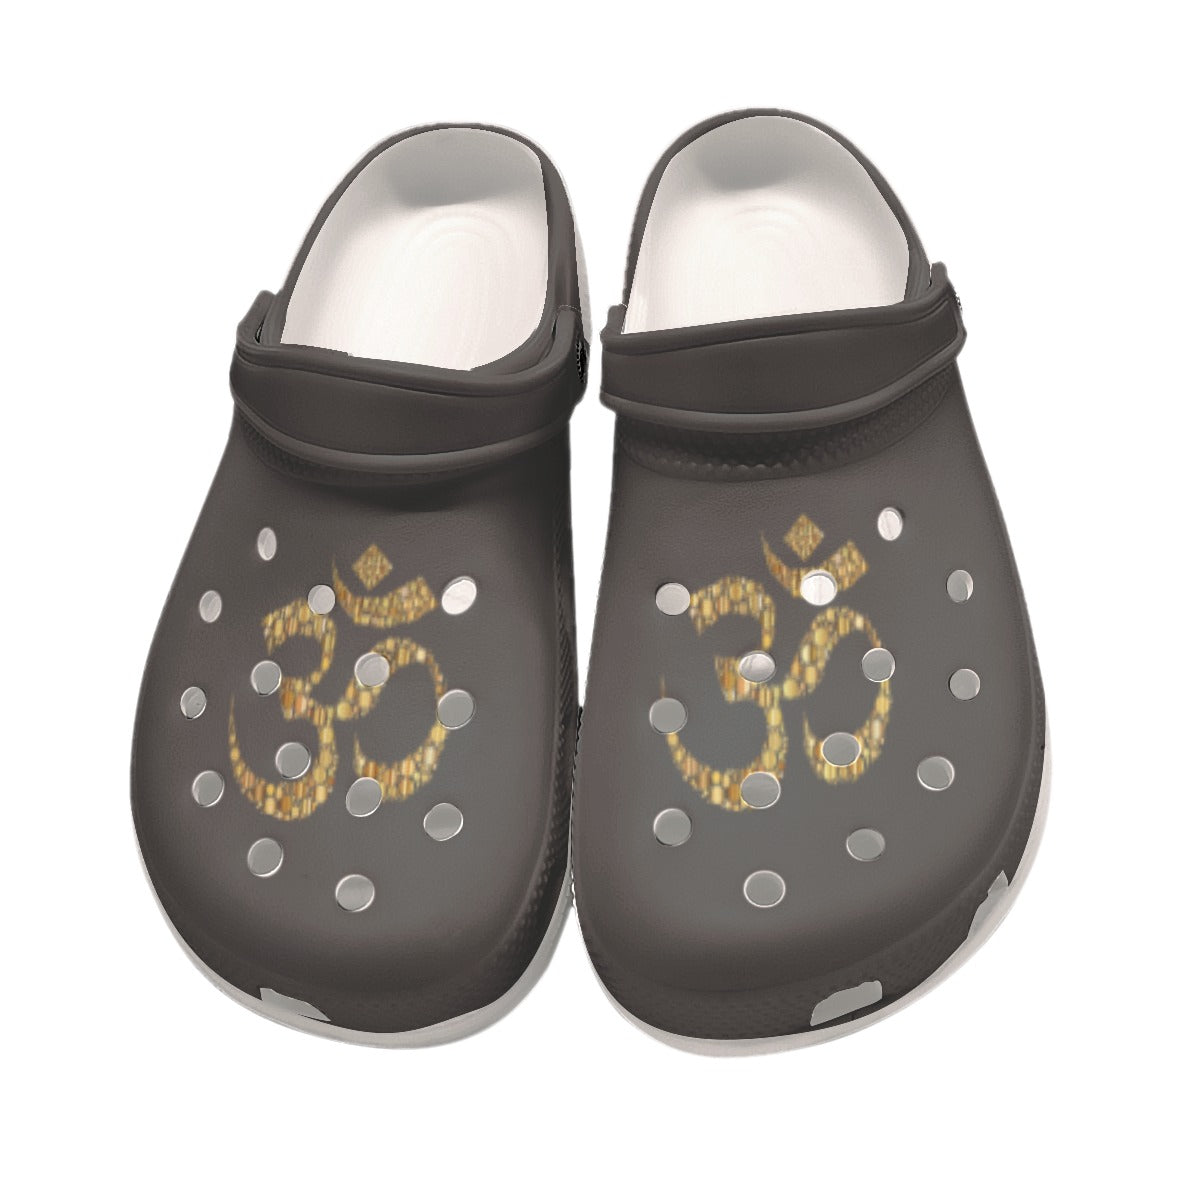 Aum (Om) Women's Classic Clogs - Zen Footwear - Meditation Gift Ideas - Personal Hour for Yoga and Meditations 